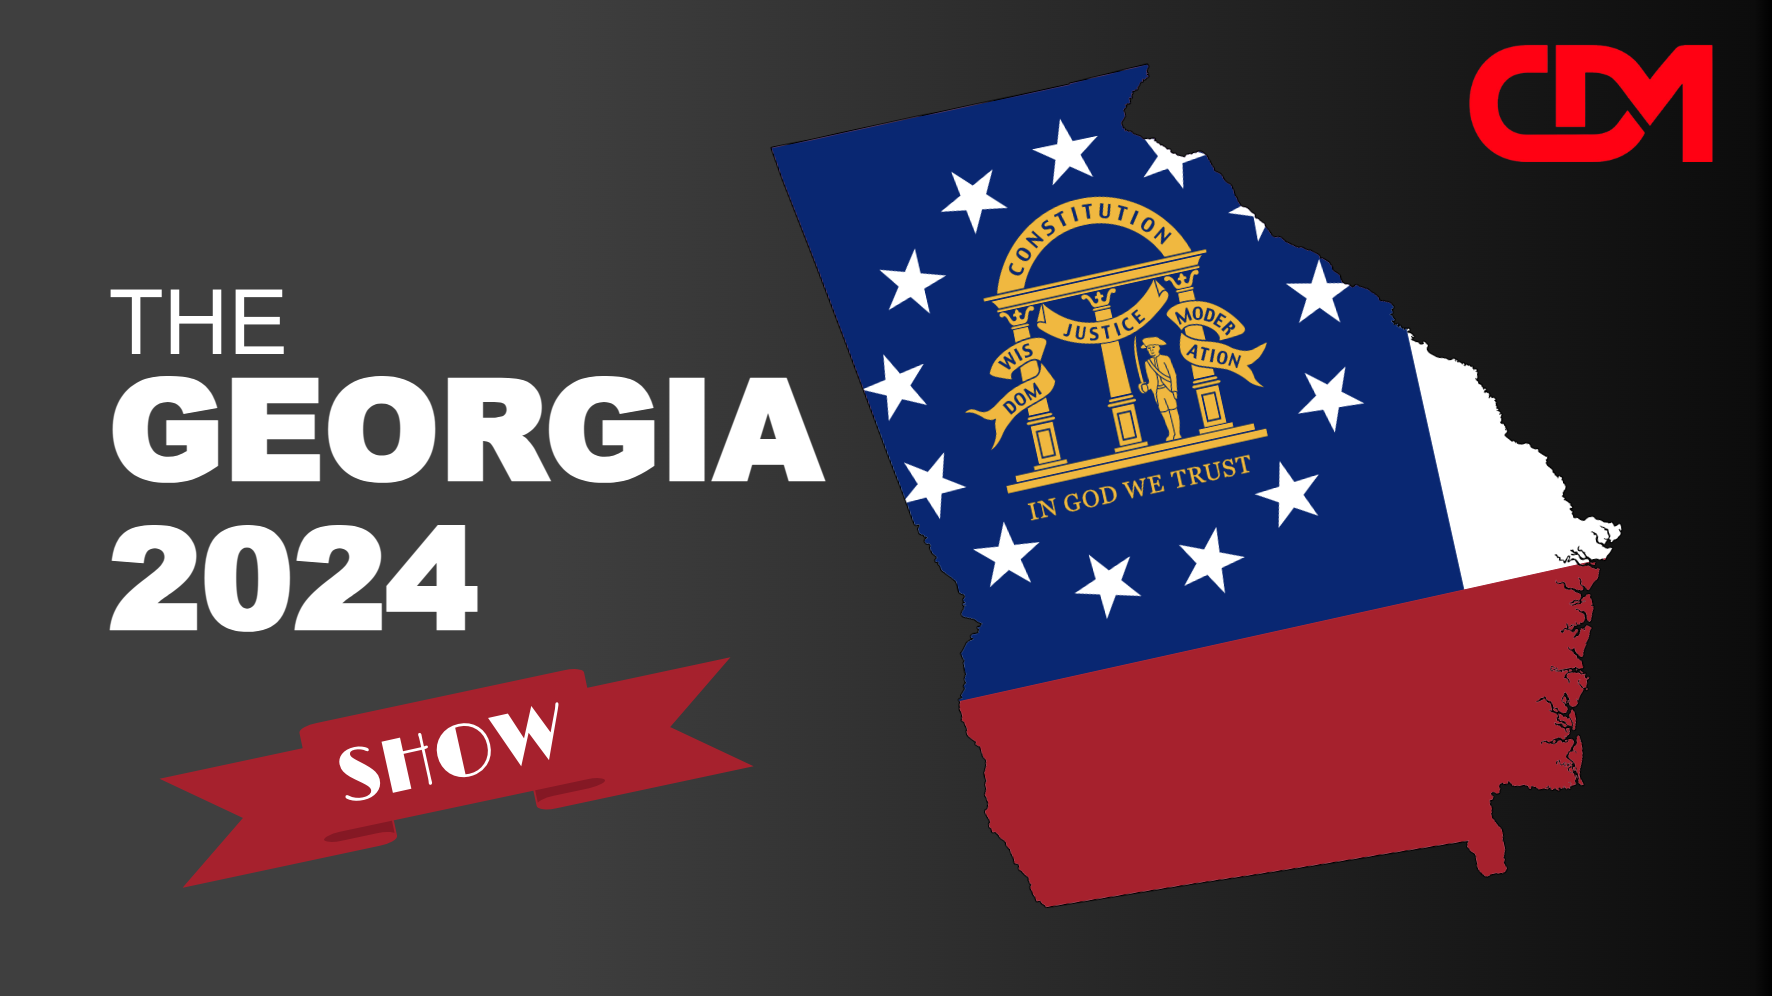 LIVE 2pm EST - The Georgia 2024 Show - Garland Favorito with L Todd Wood Direct From Israel